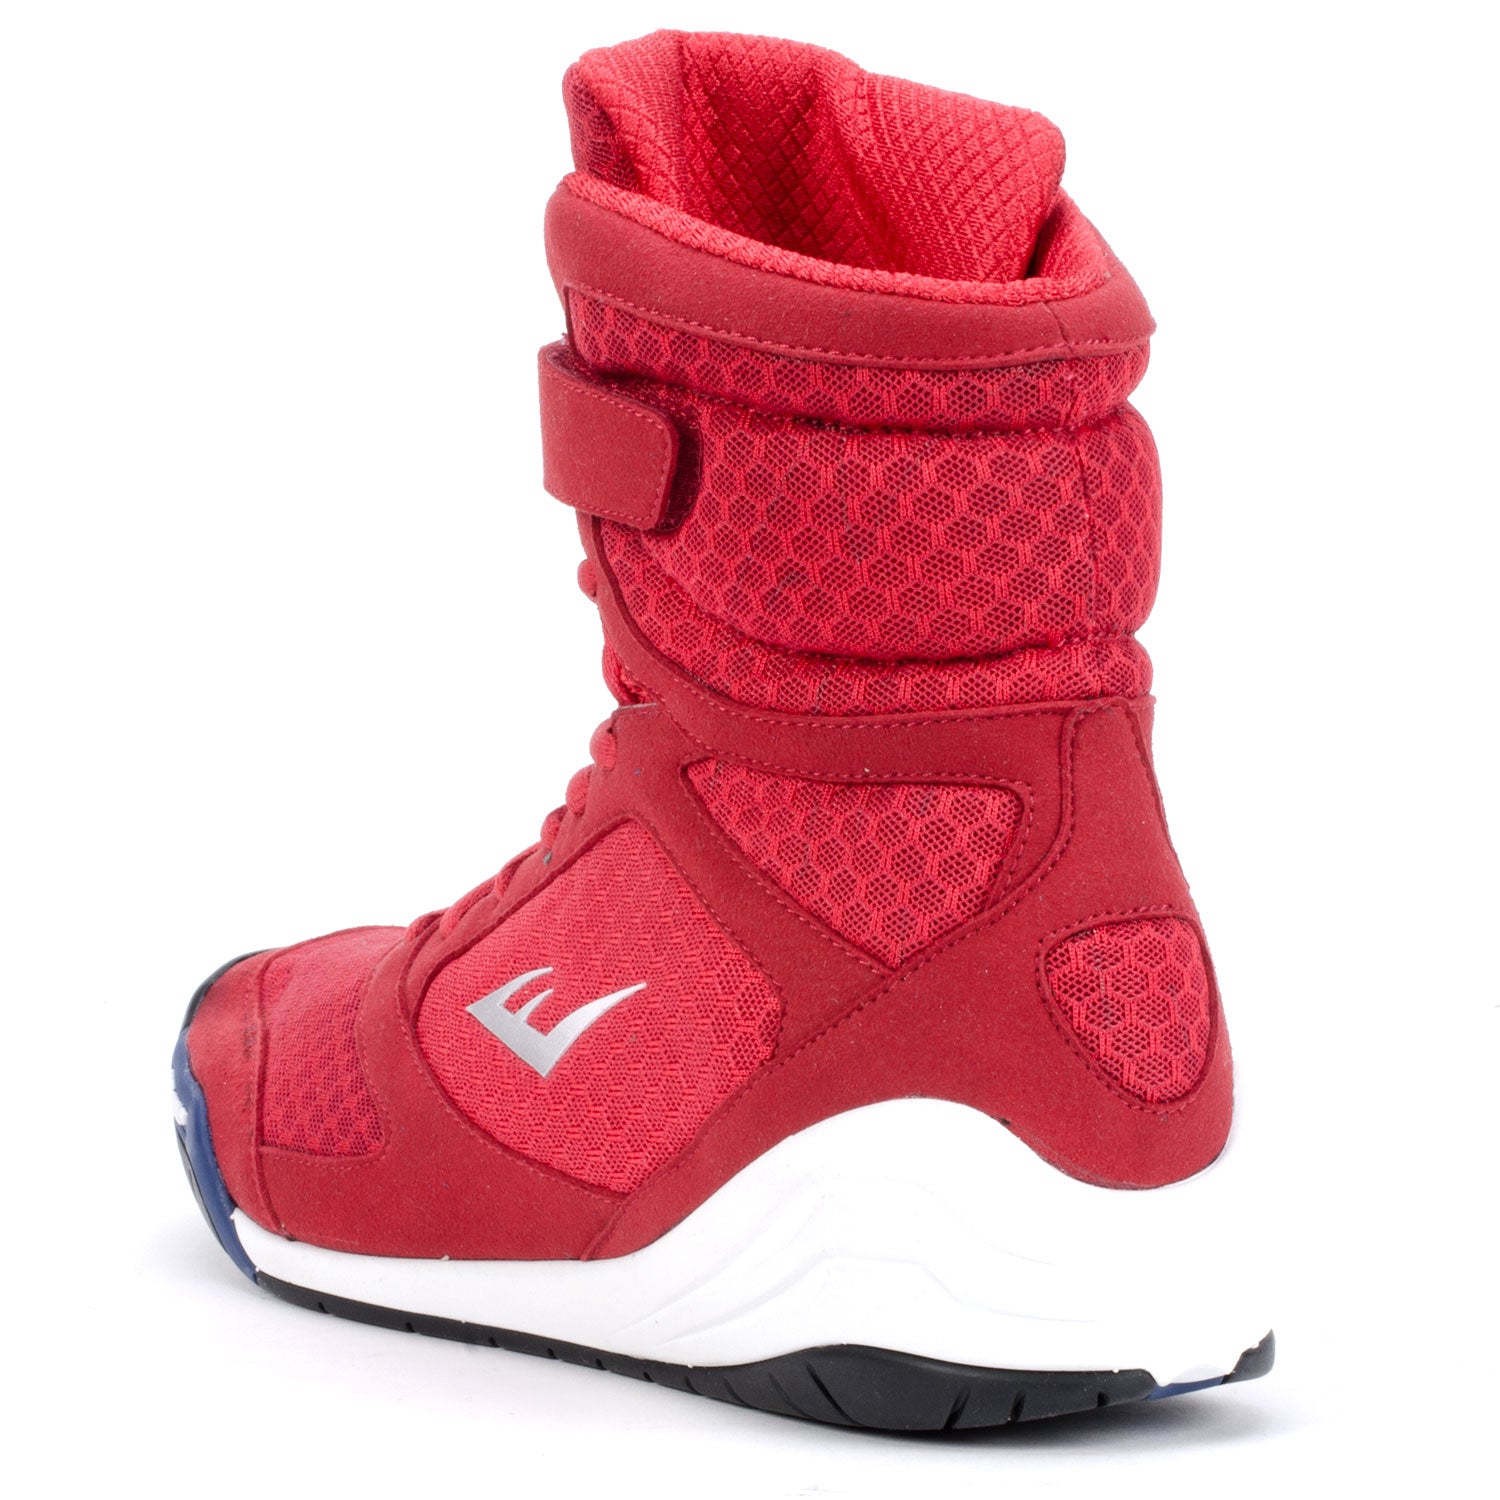 red boxing boots